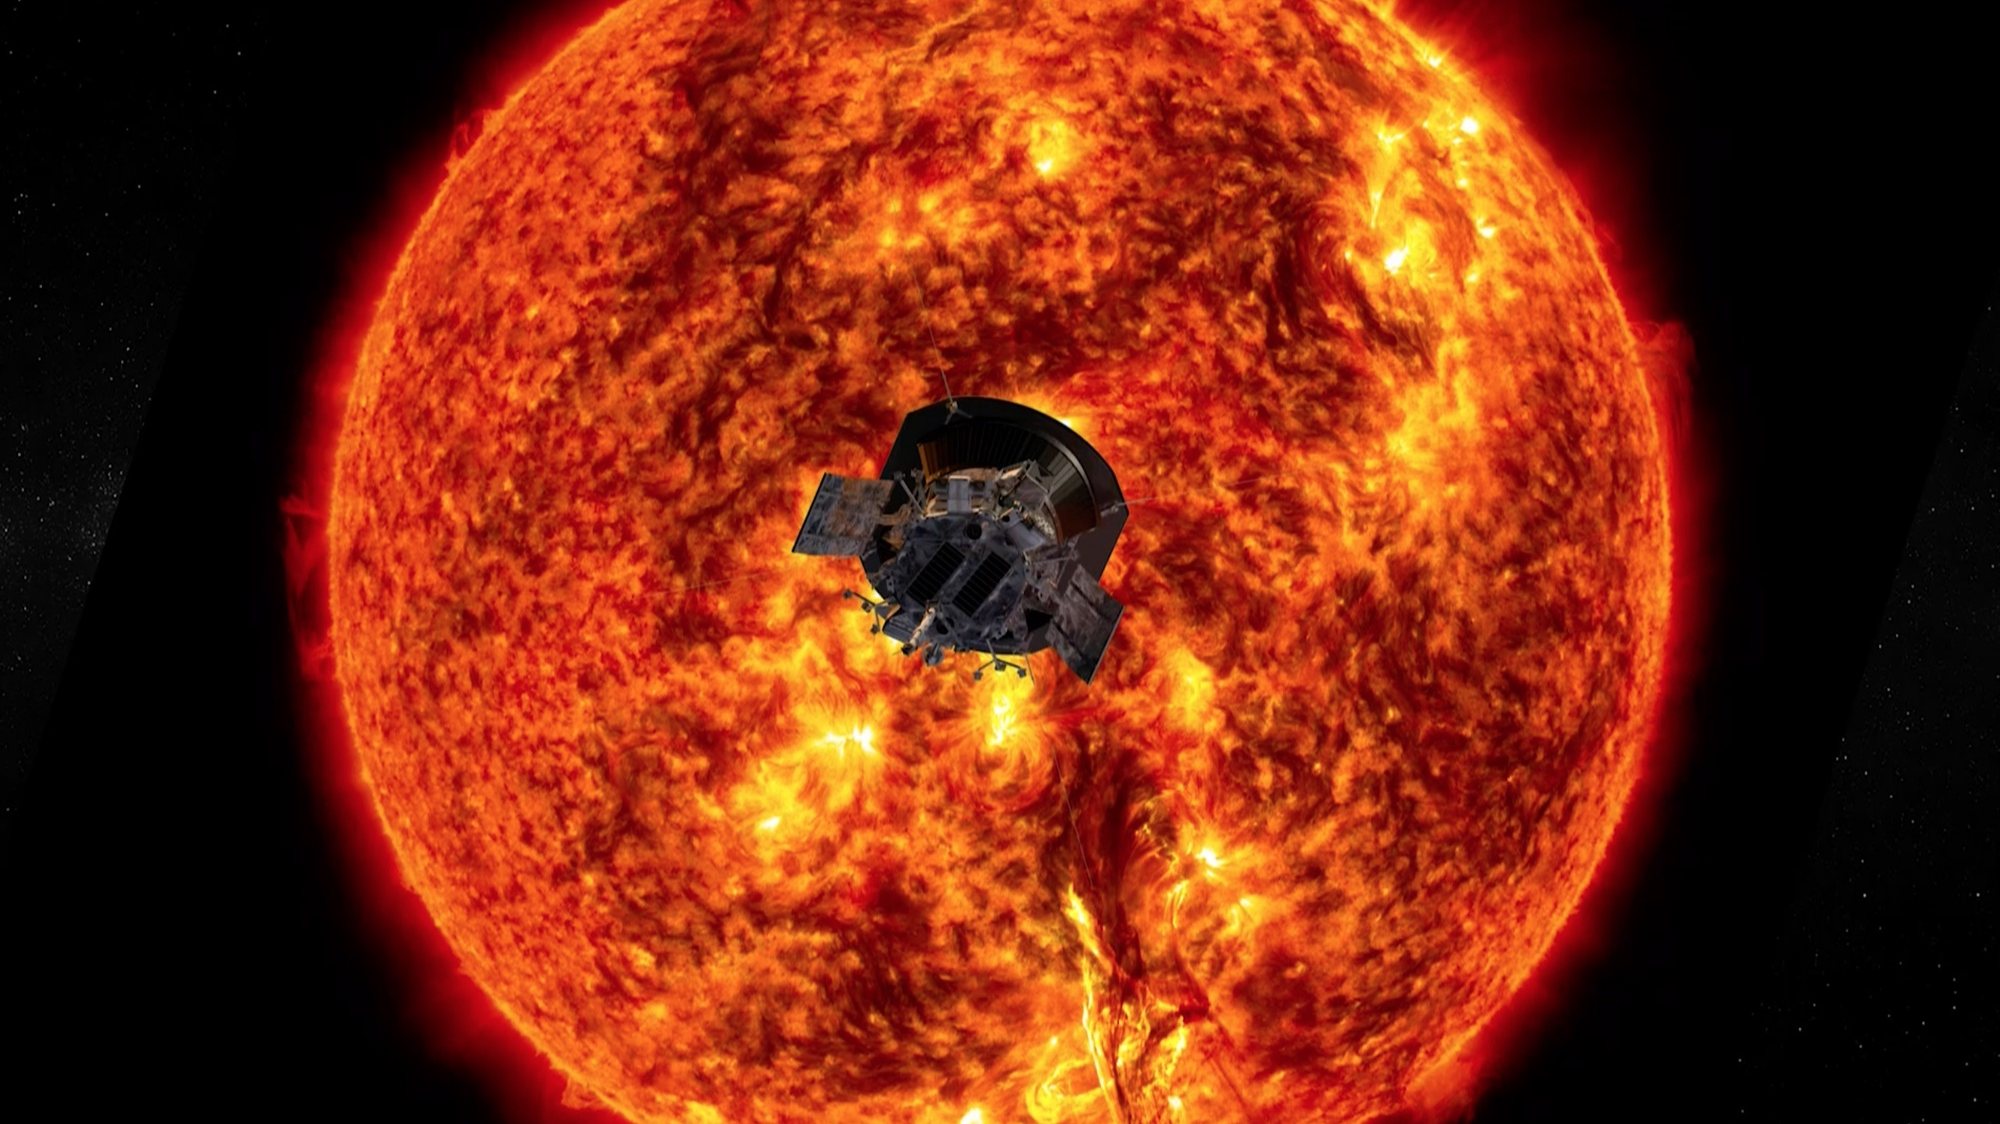 epa08046633 An undated handout photo made available by NASA on 11 August 2018 shows an artists&#039; impression of the Parker Solar Probe (PSP) approaching the Sun (issued 05 December 2019). NASA&#039;s Parker Solar Probe launched to space in August 2018, soon becoming the closest-ever spacecraft to the Sun. With cutting-edge scientific instruments to measure the environment around the spacecraft, Parker Solar Probe has completed three of 24 planned passes through never-before-explored parts of the Sun&#039;s atmosphere, the corona. On 04 December 2019, four new papers in the journal Nature describe what scientists have learned from this unprecedented exploration of our star - and what they look forward to learning next.  EPA/NASA/JOHNS HOPKINS APL HANDOUT  HANDOUT EDITORIAL USE ONLY/NO SALES